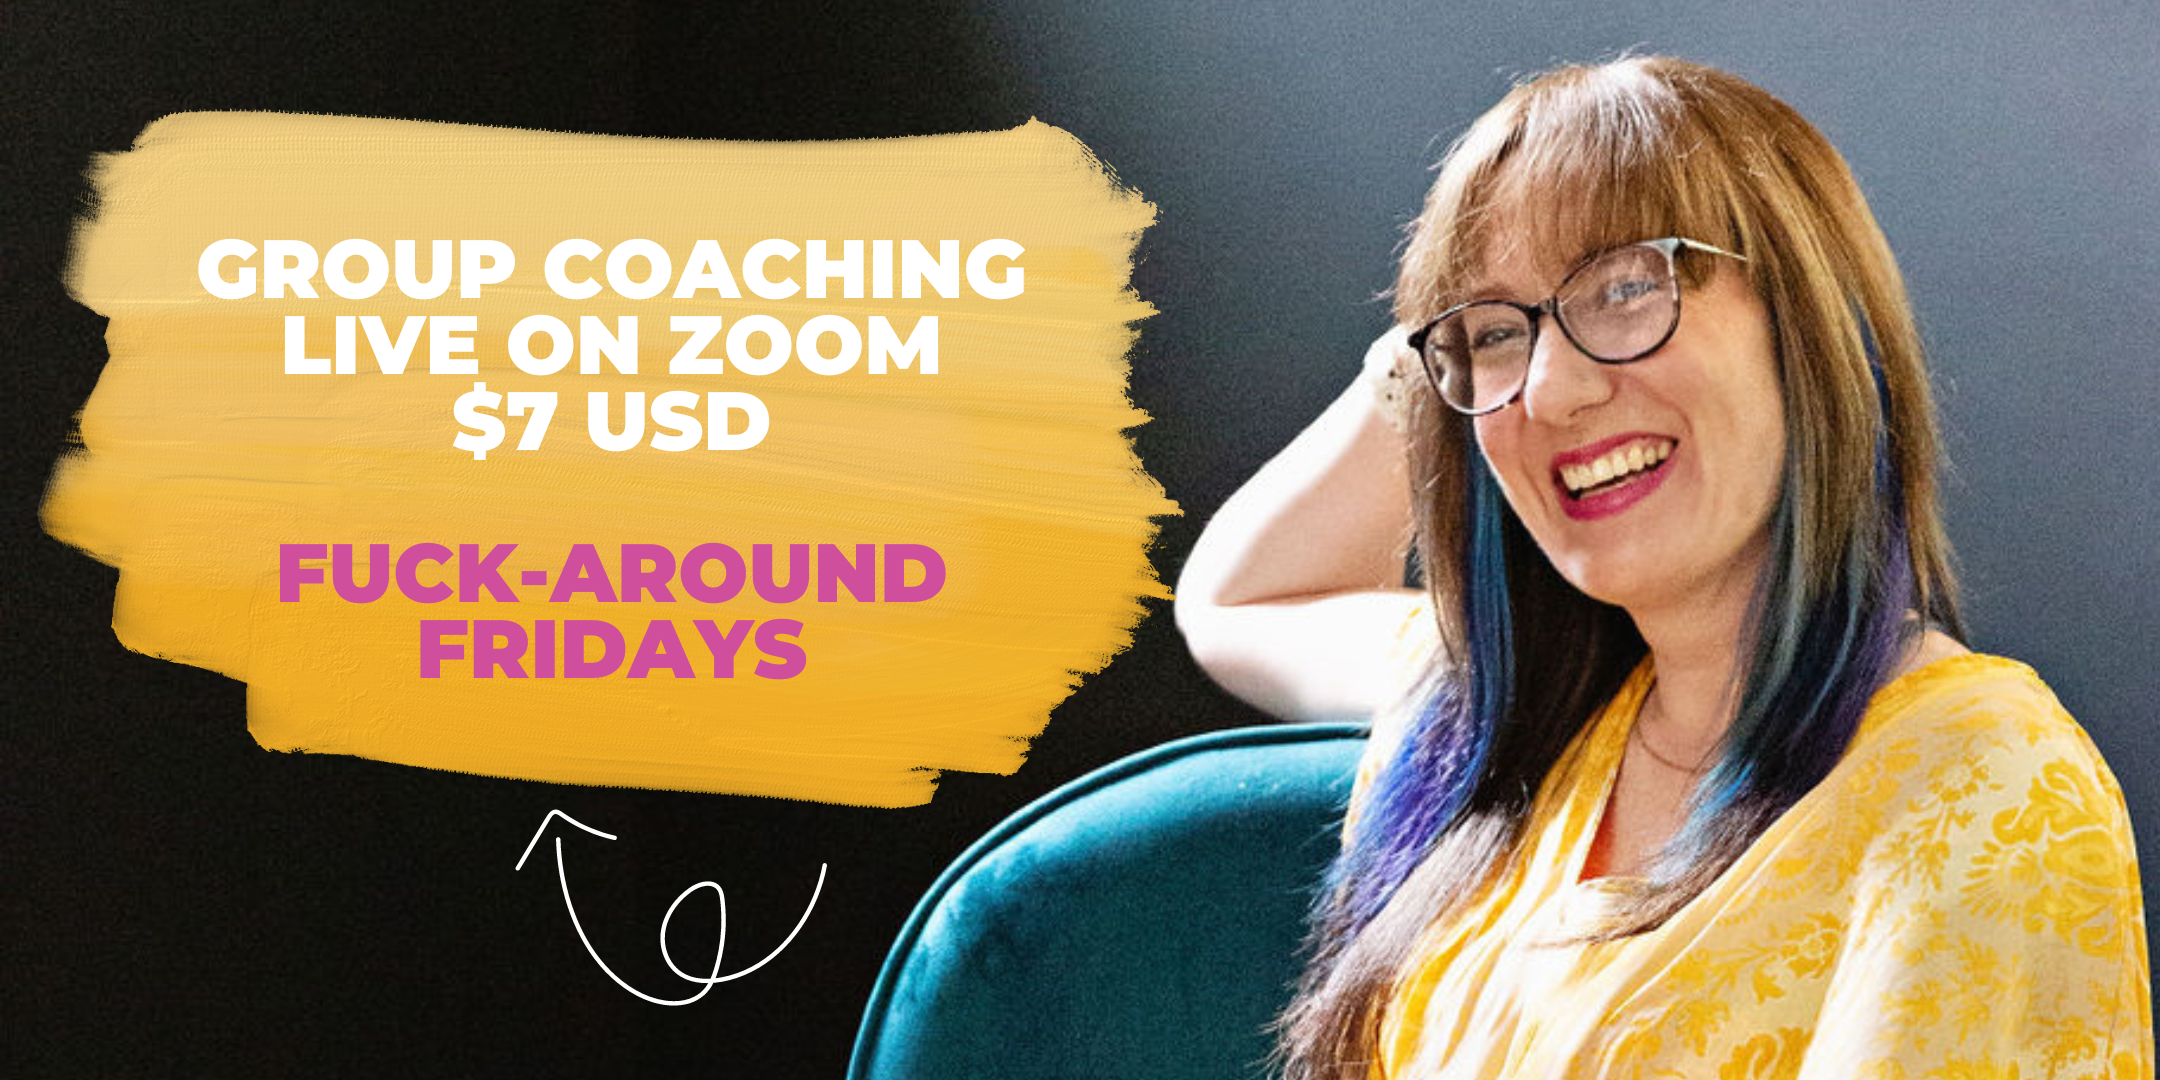 fuck-around fridays live group coaching with integrative business coach kristen king